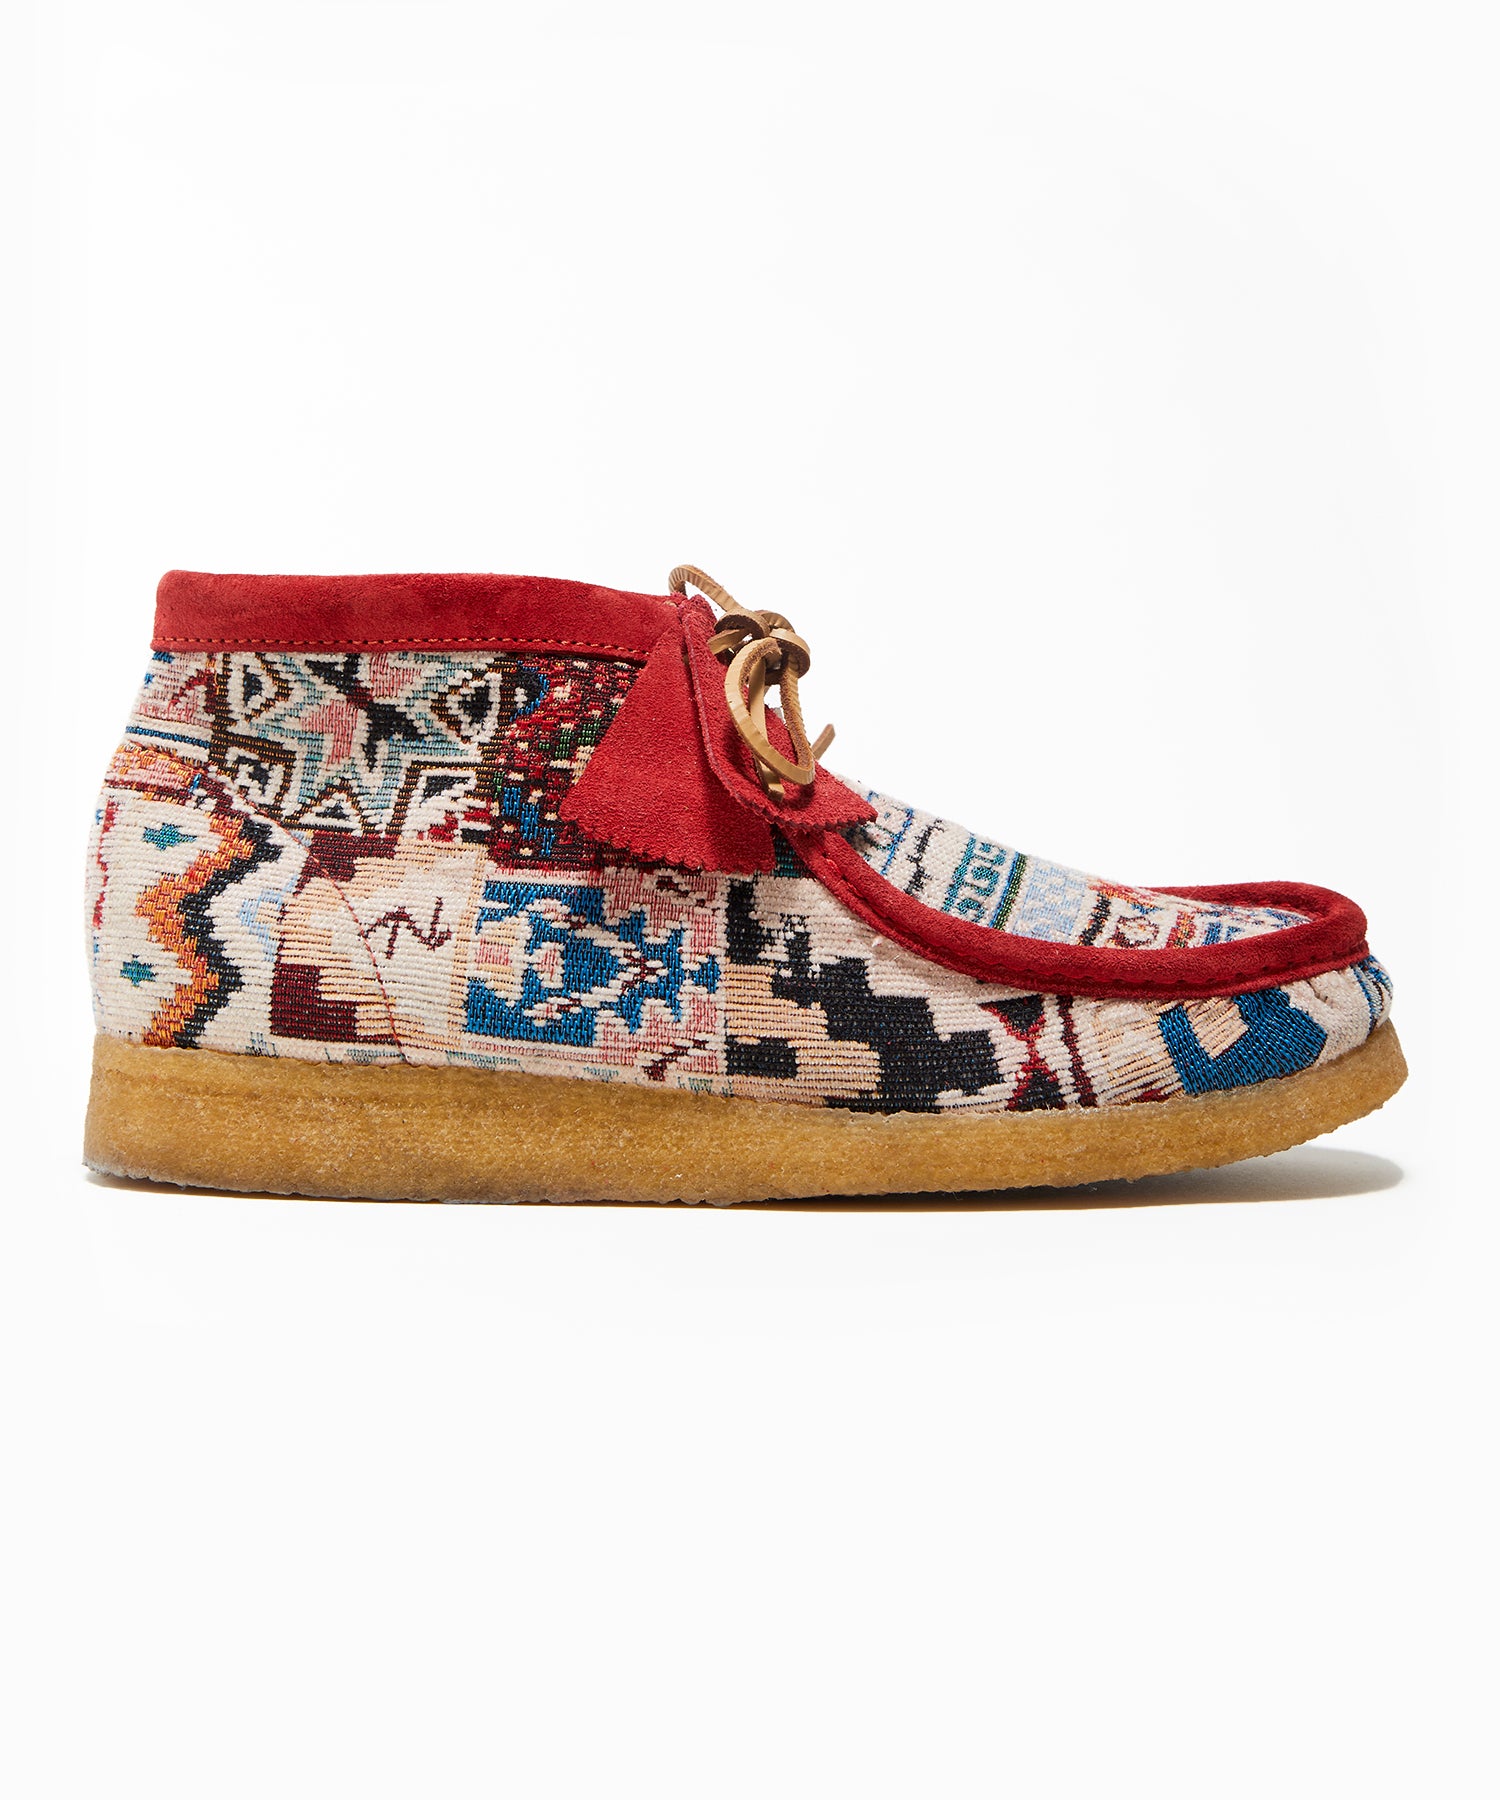 Image of Todd Snyder x Clarks Originals Kaleidoscopic Red Wallabee Boot